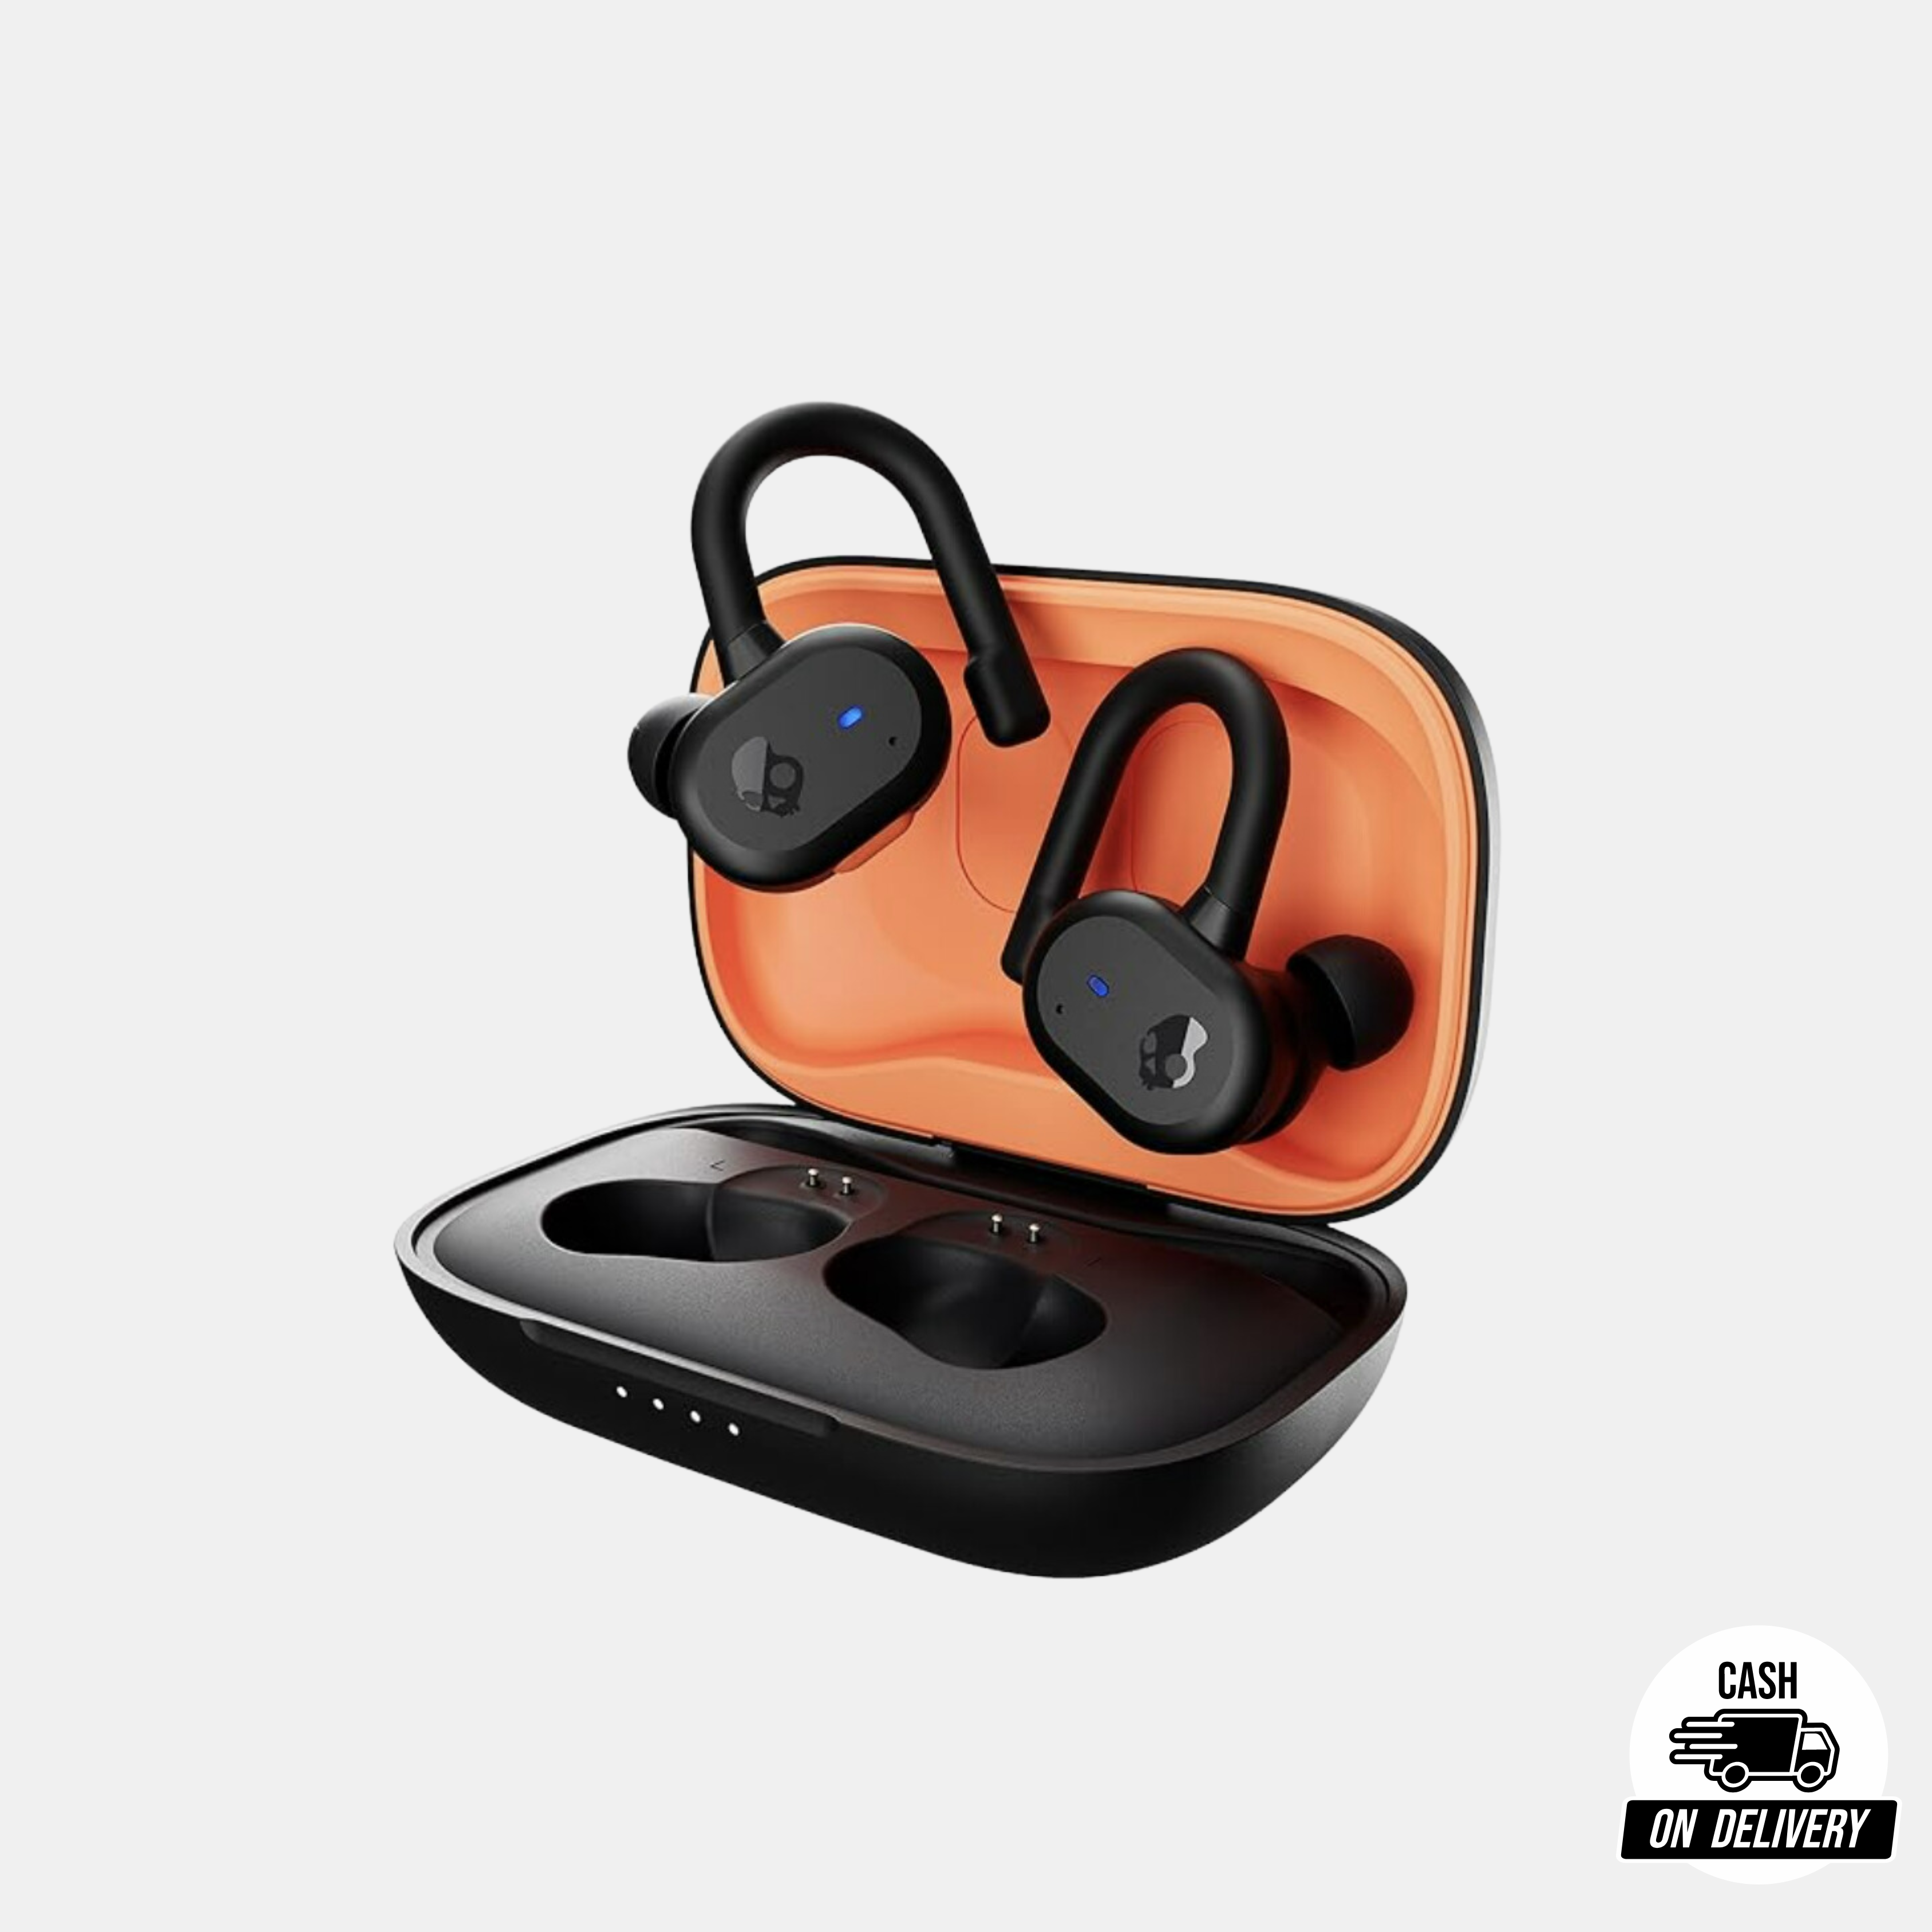 (Brand New) Skullcandy Push Active in-Ear Wireless Earbuds, 43 Hr Battery, Skull-iQ, Alexa Enabled, Microphone, Works with iPhone Android and Bluetooth Devices -Black Orange